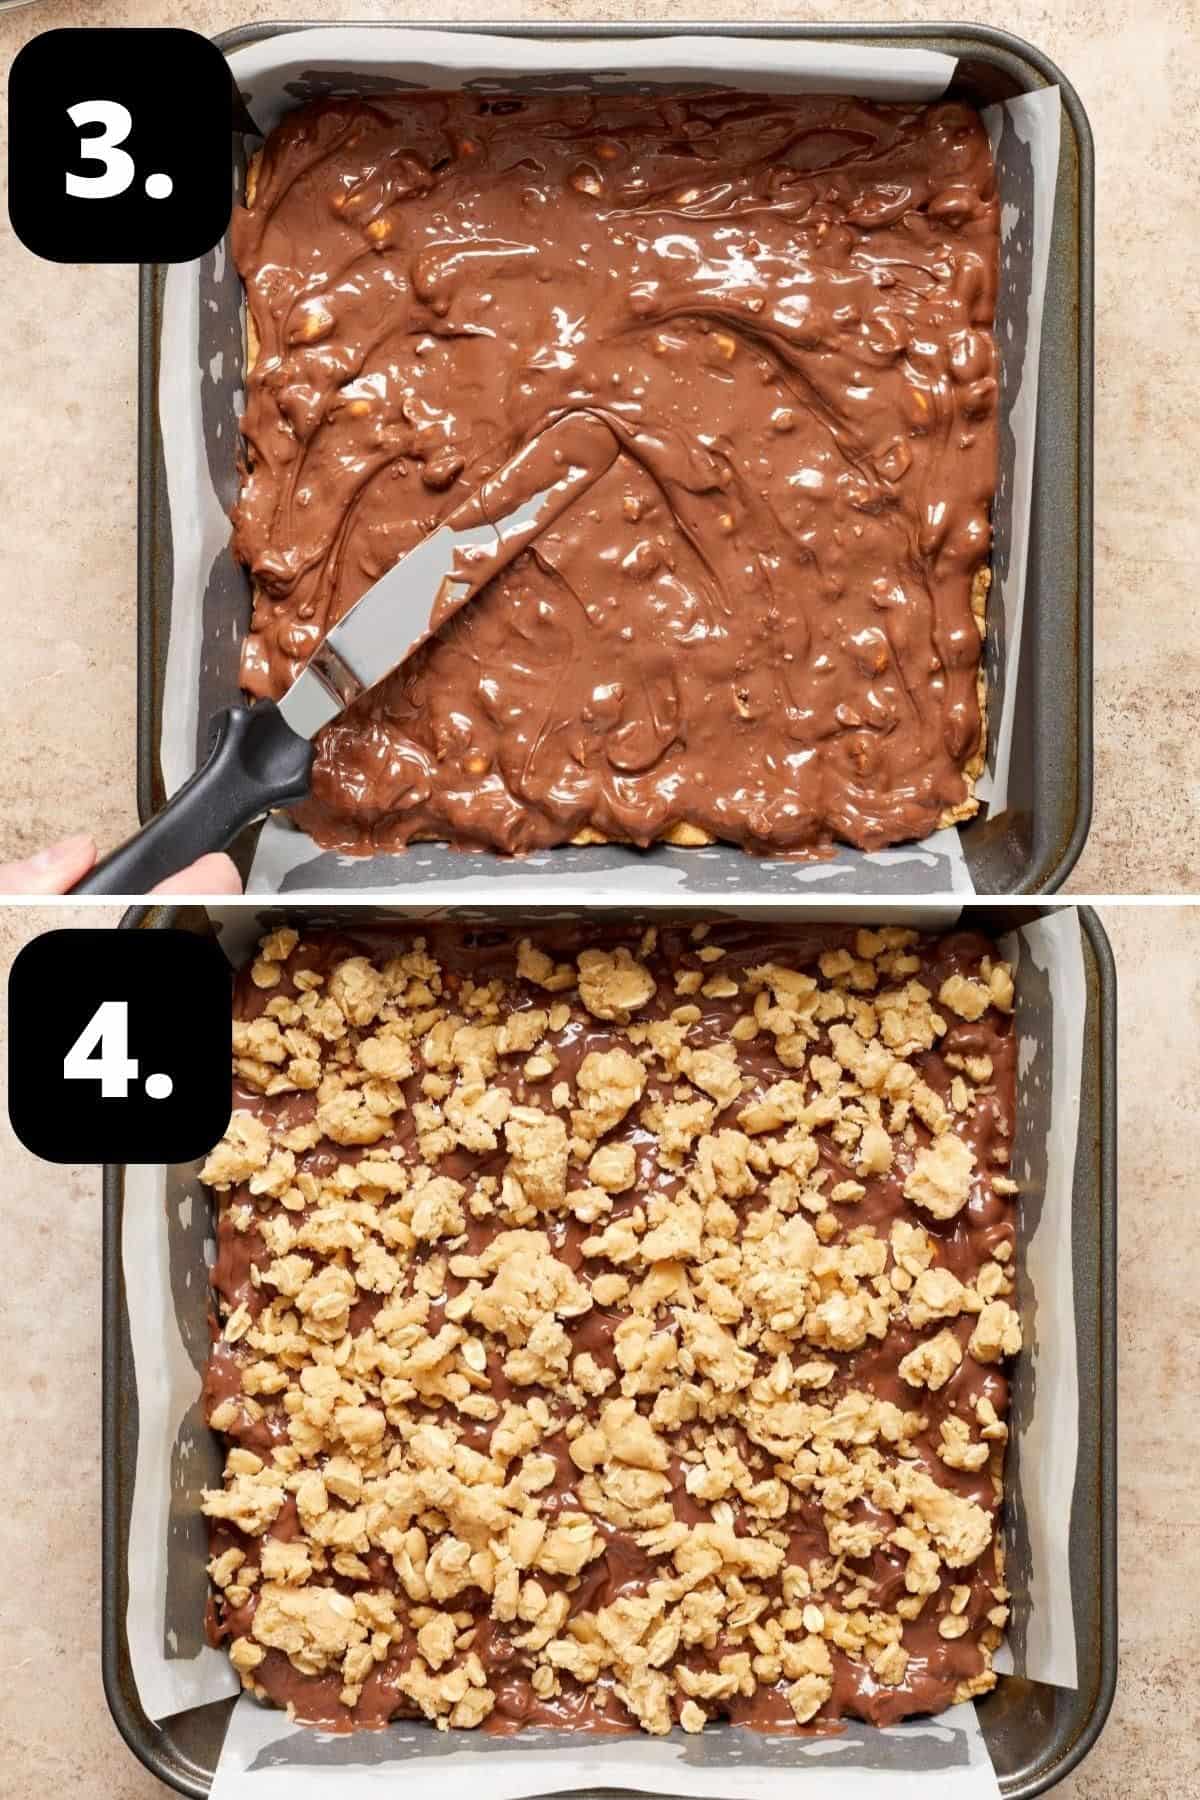 Steps 3-4 of preparing this recipe - topping the base with the Nutella mixture and adding the remaining crumble to the top.